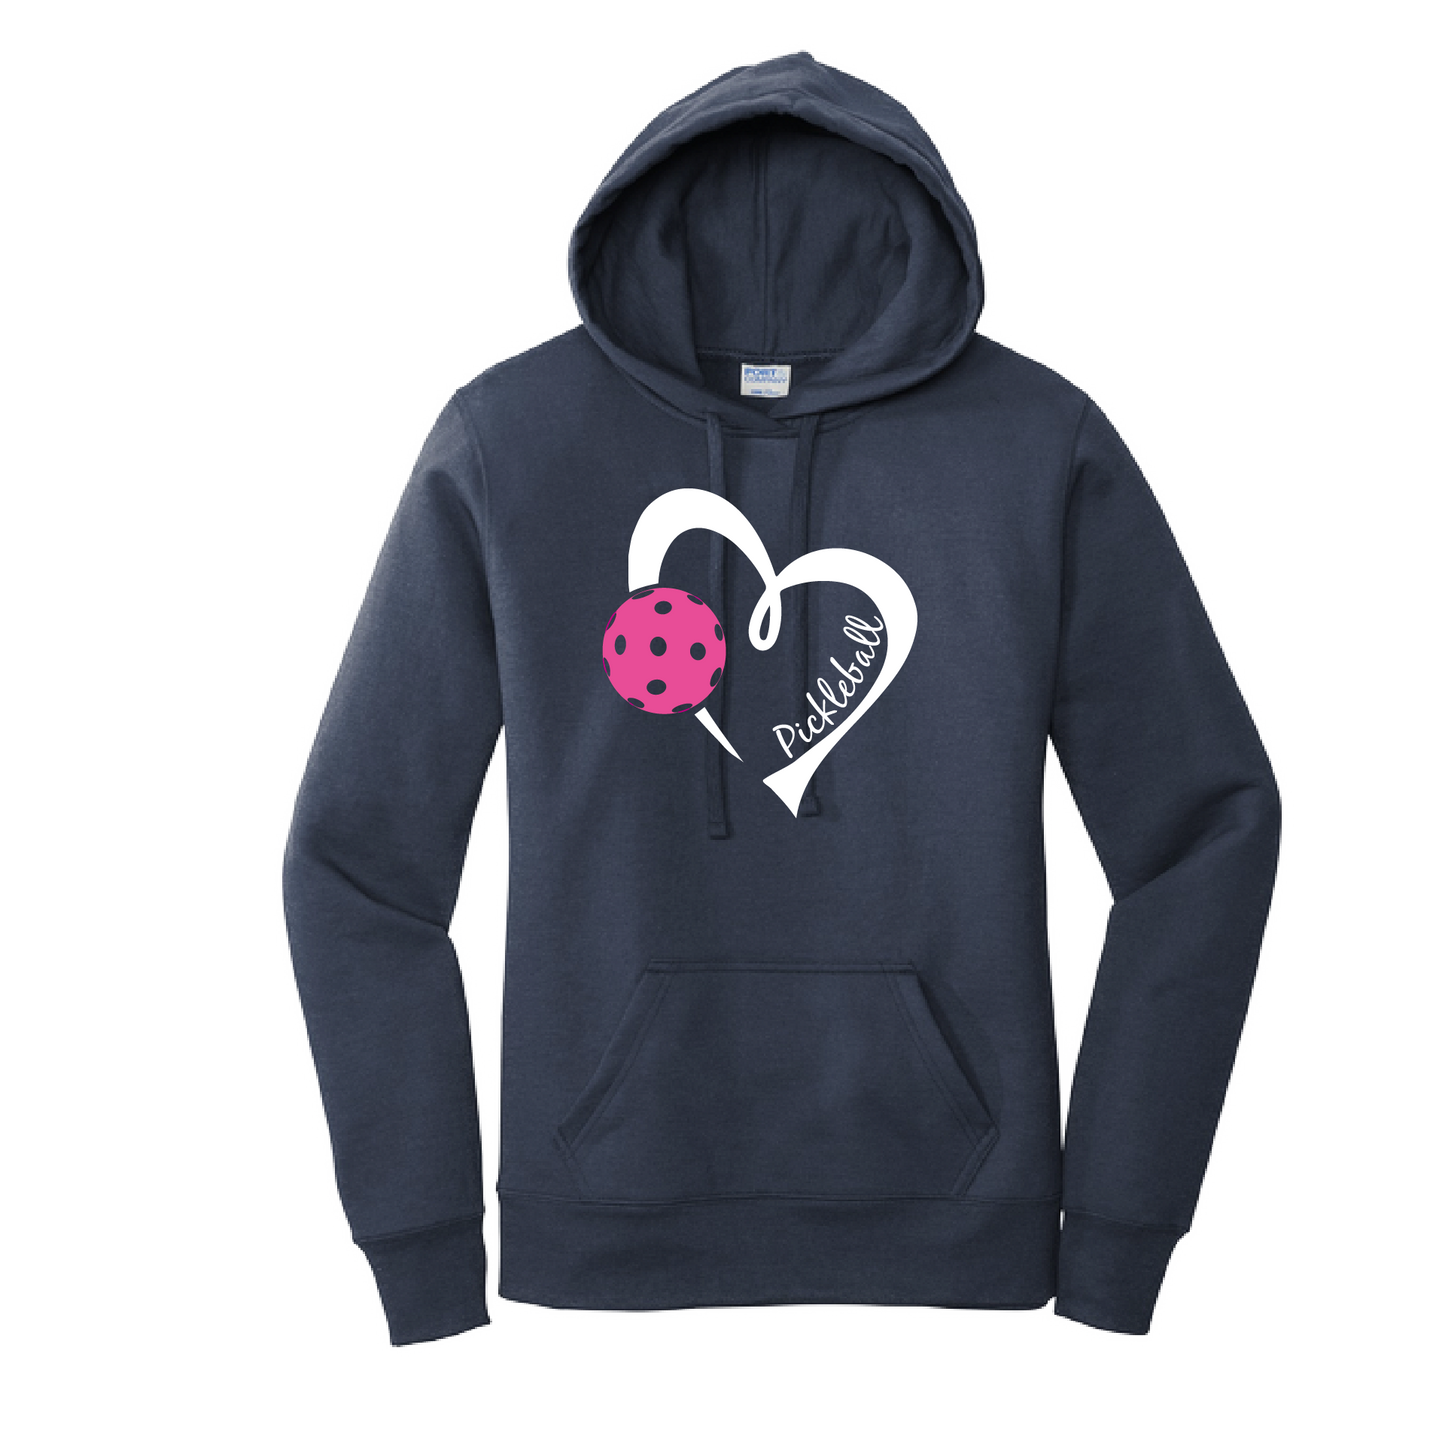 Pickleball Design: Heart with Pickleball  Women's Hooded pullover Sweatshirt  Turn up the volume in this Women's Sweatshirts with its perfect mix of softness and attitude. Ultra soft lined inside with a lined hood also. This is fitted nicely for a women's figure. Front pouch pocket.